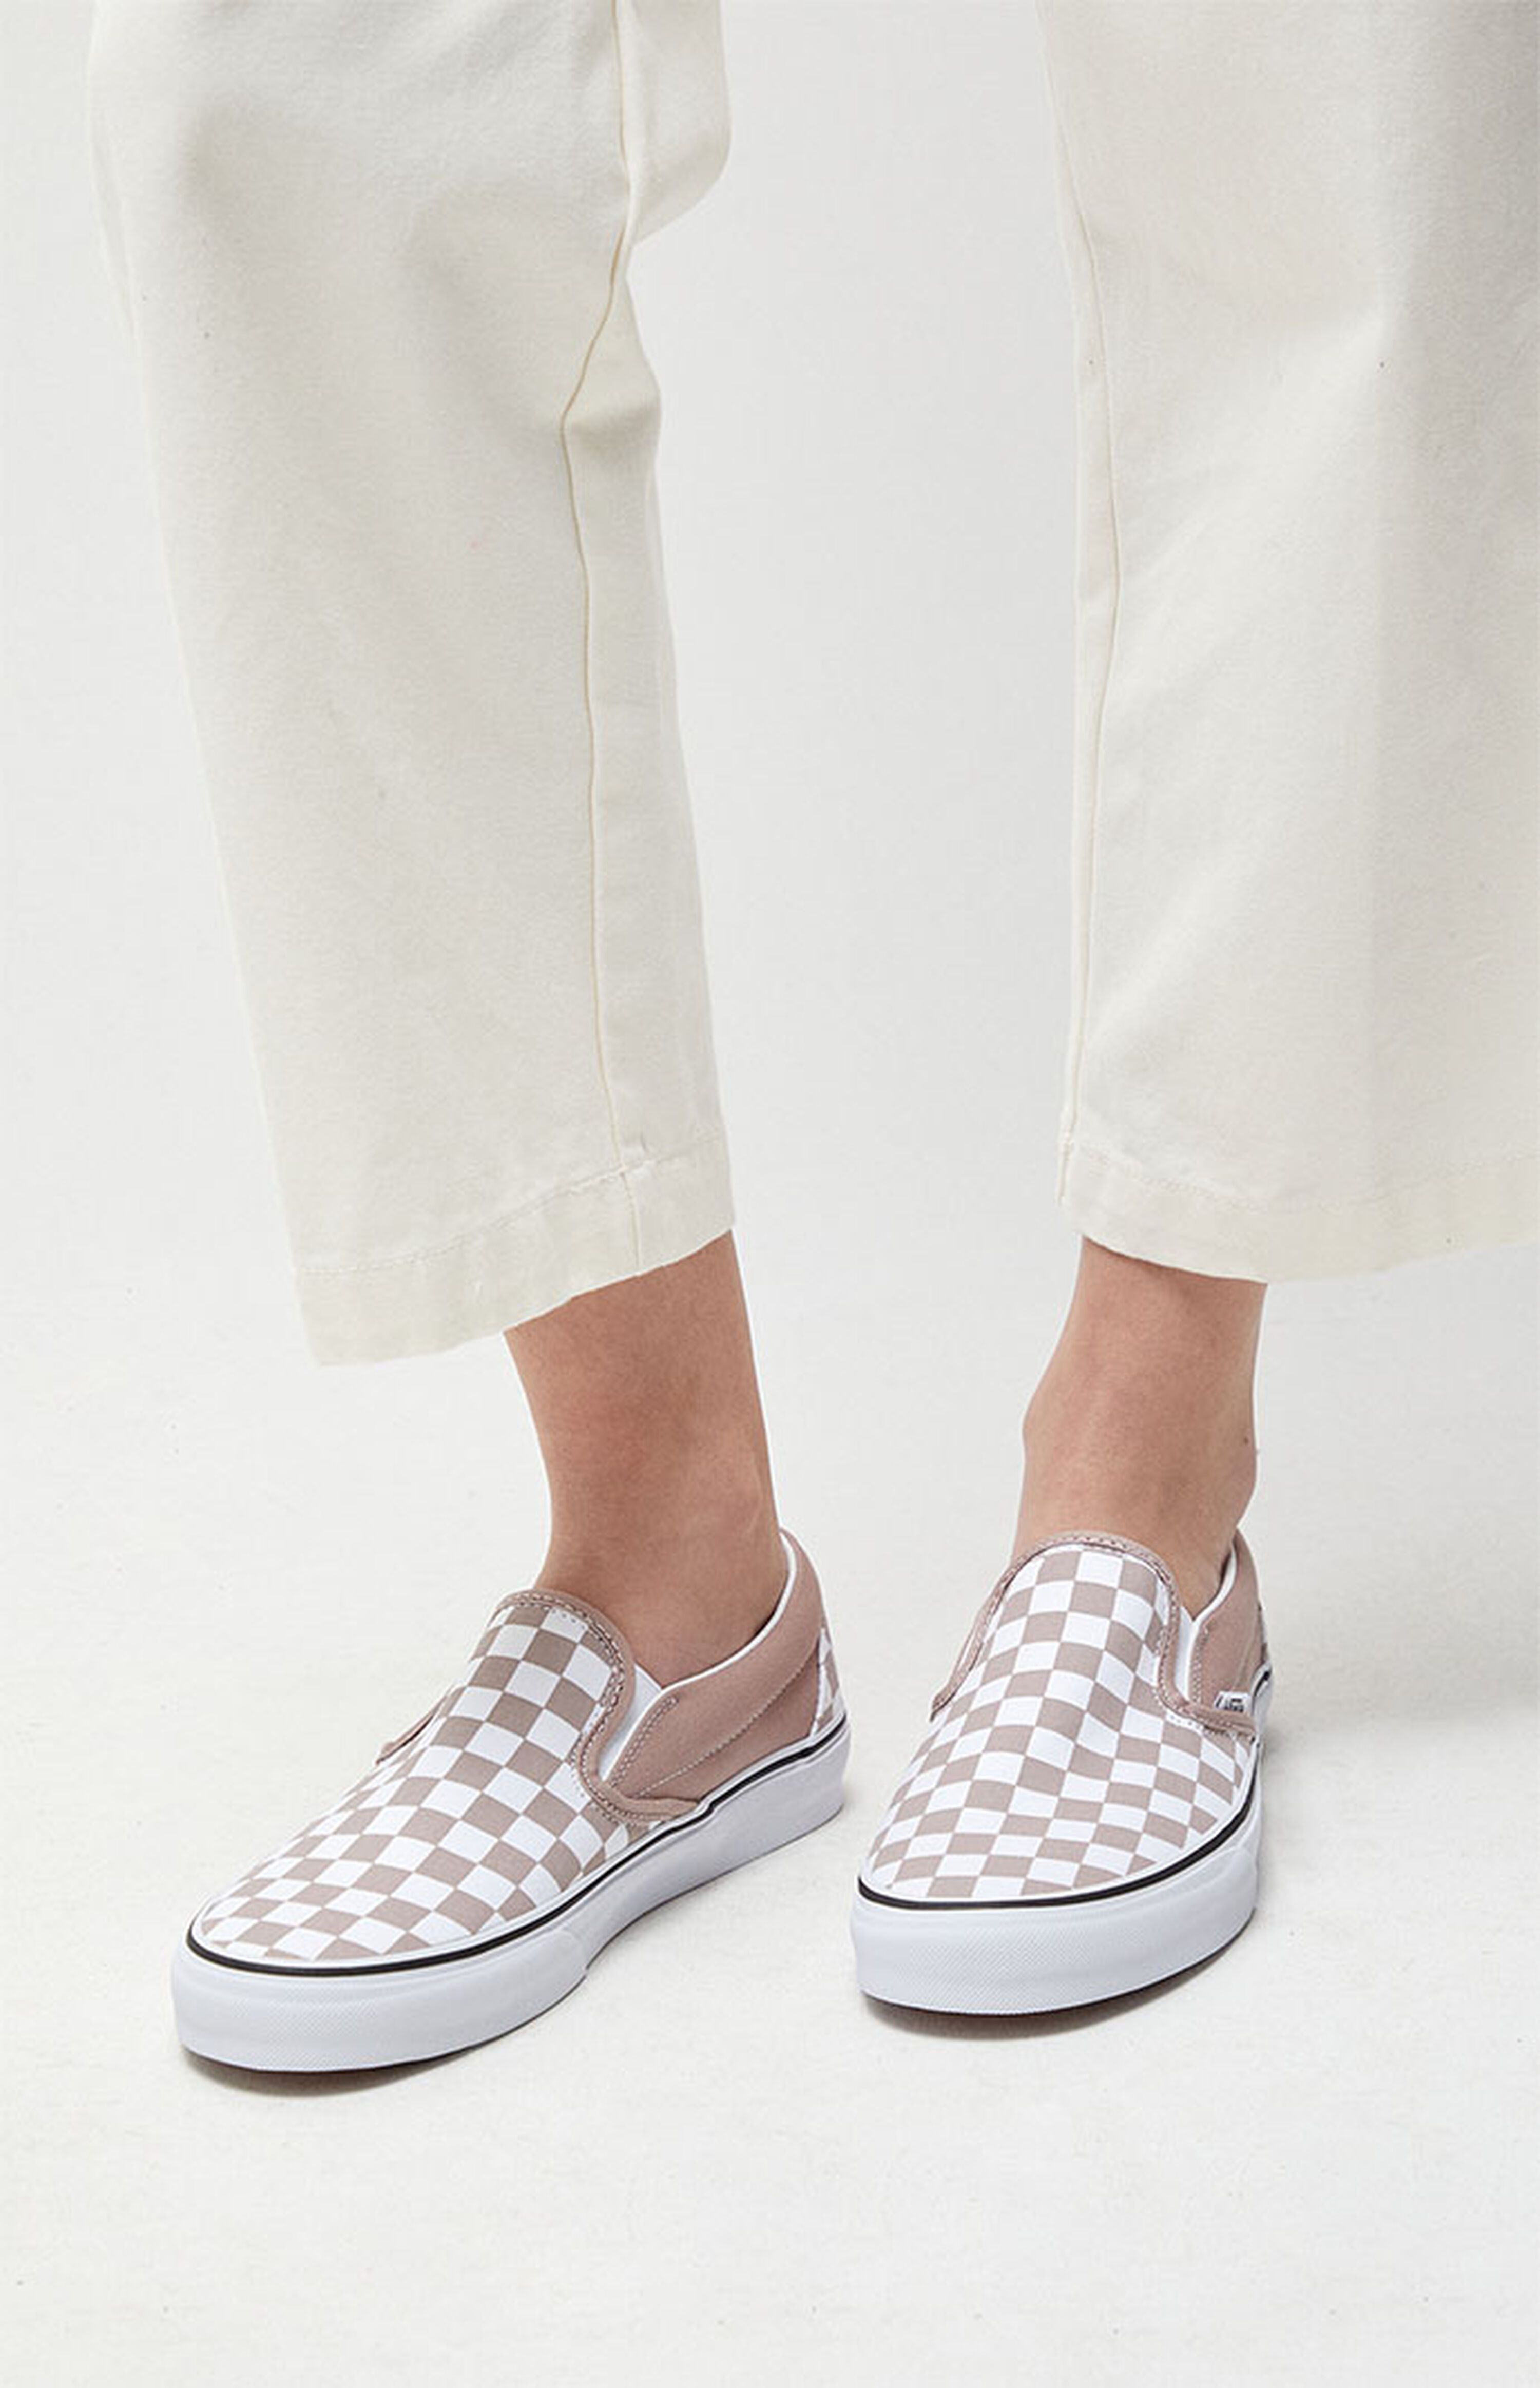 Vans Checkered Slip-On Sneakers | PacSun | PacSun